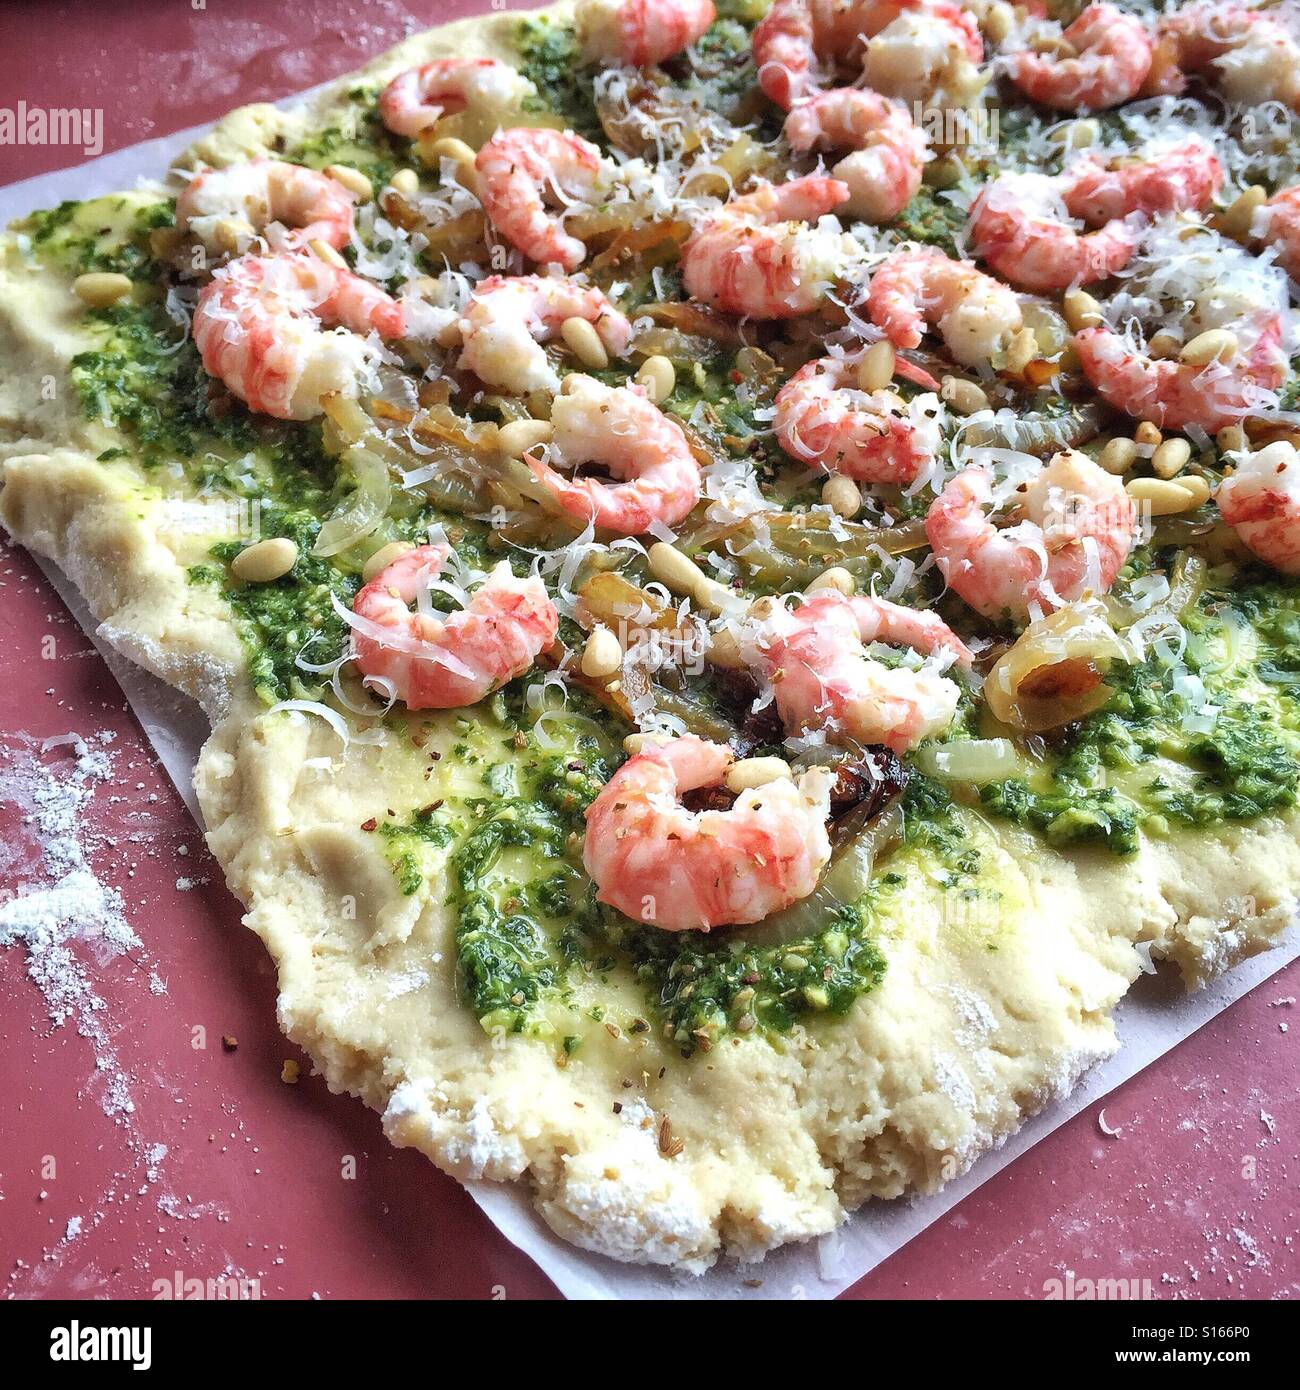 Homemade pizza crust topped with pesto, freshly caught prawns, pine nuts and cheese is ready for the oven. Stock Photo